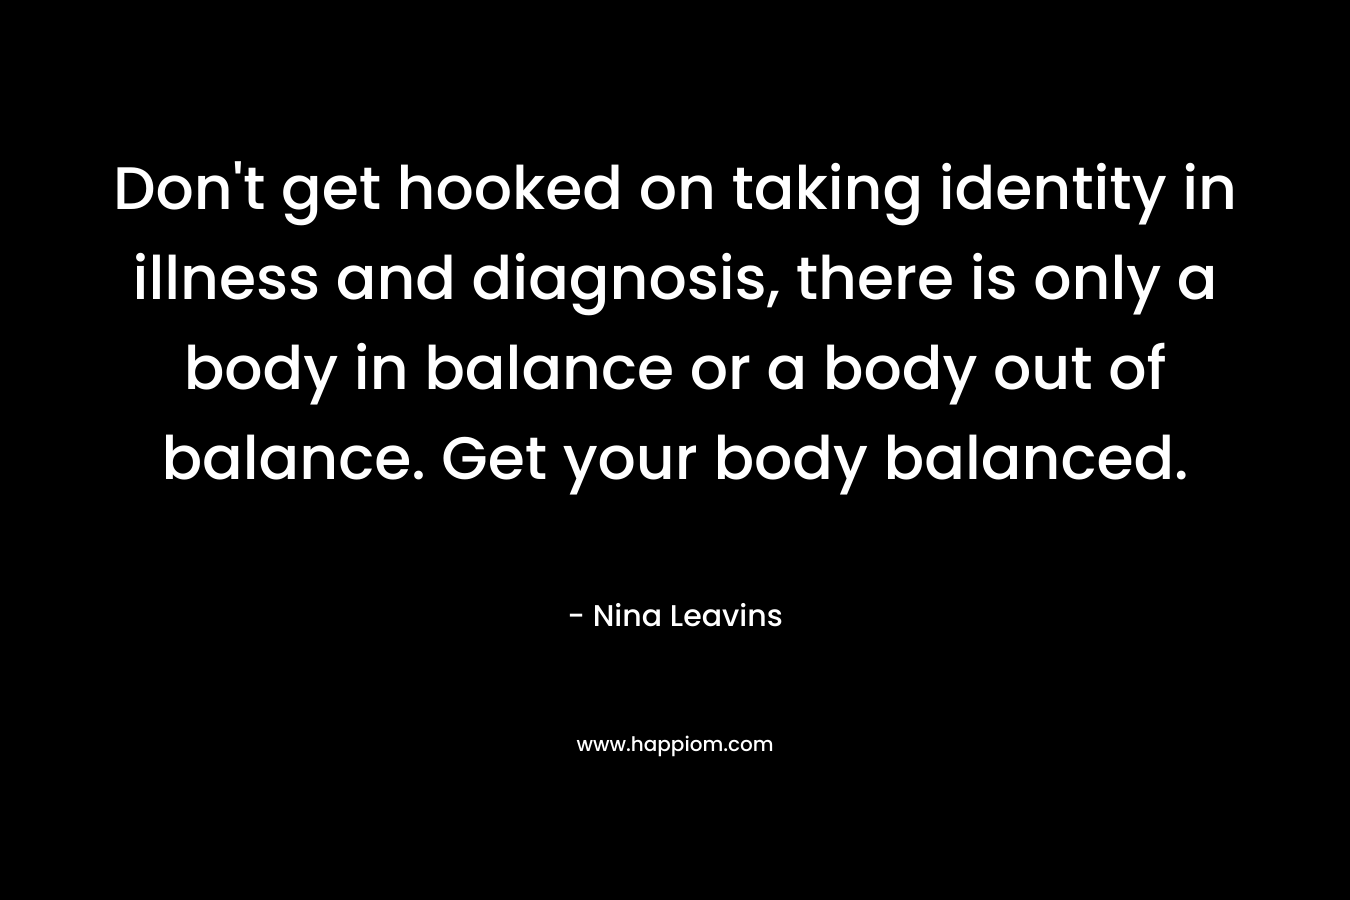 Don’t get hooked on taking identity in illness and diagnosis, there is only a body in balance or a body out of balance. Get your body balanced. – Nina Leavins